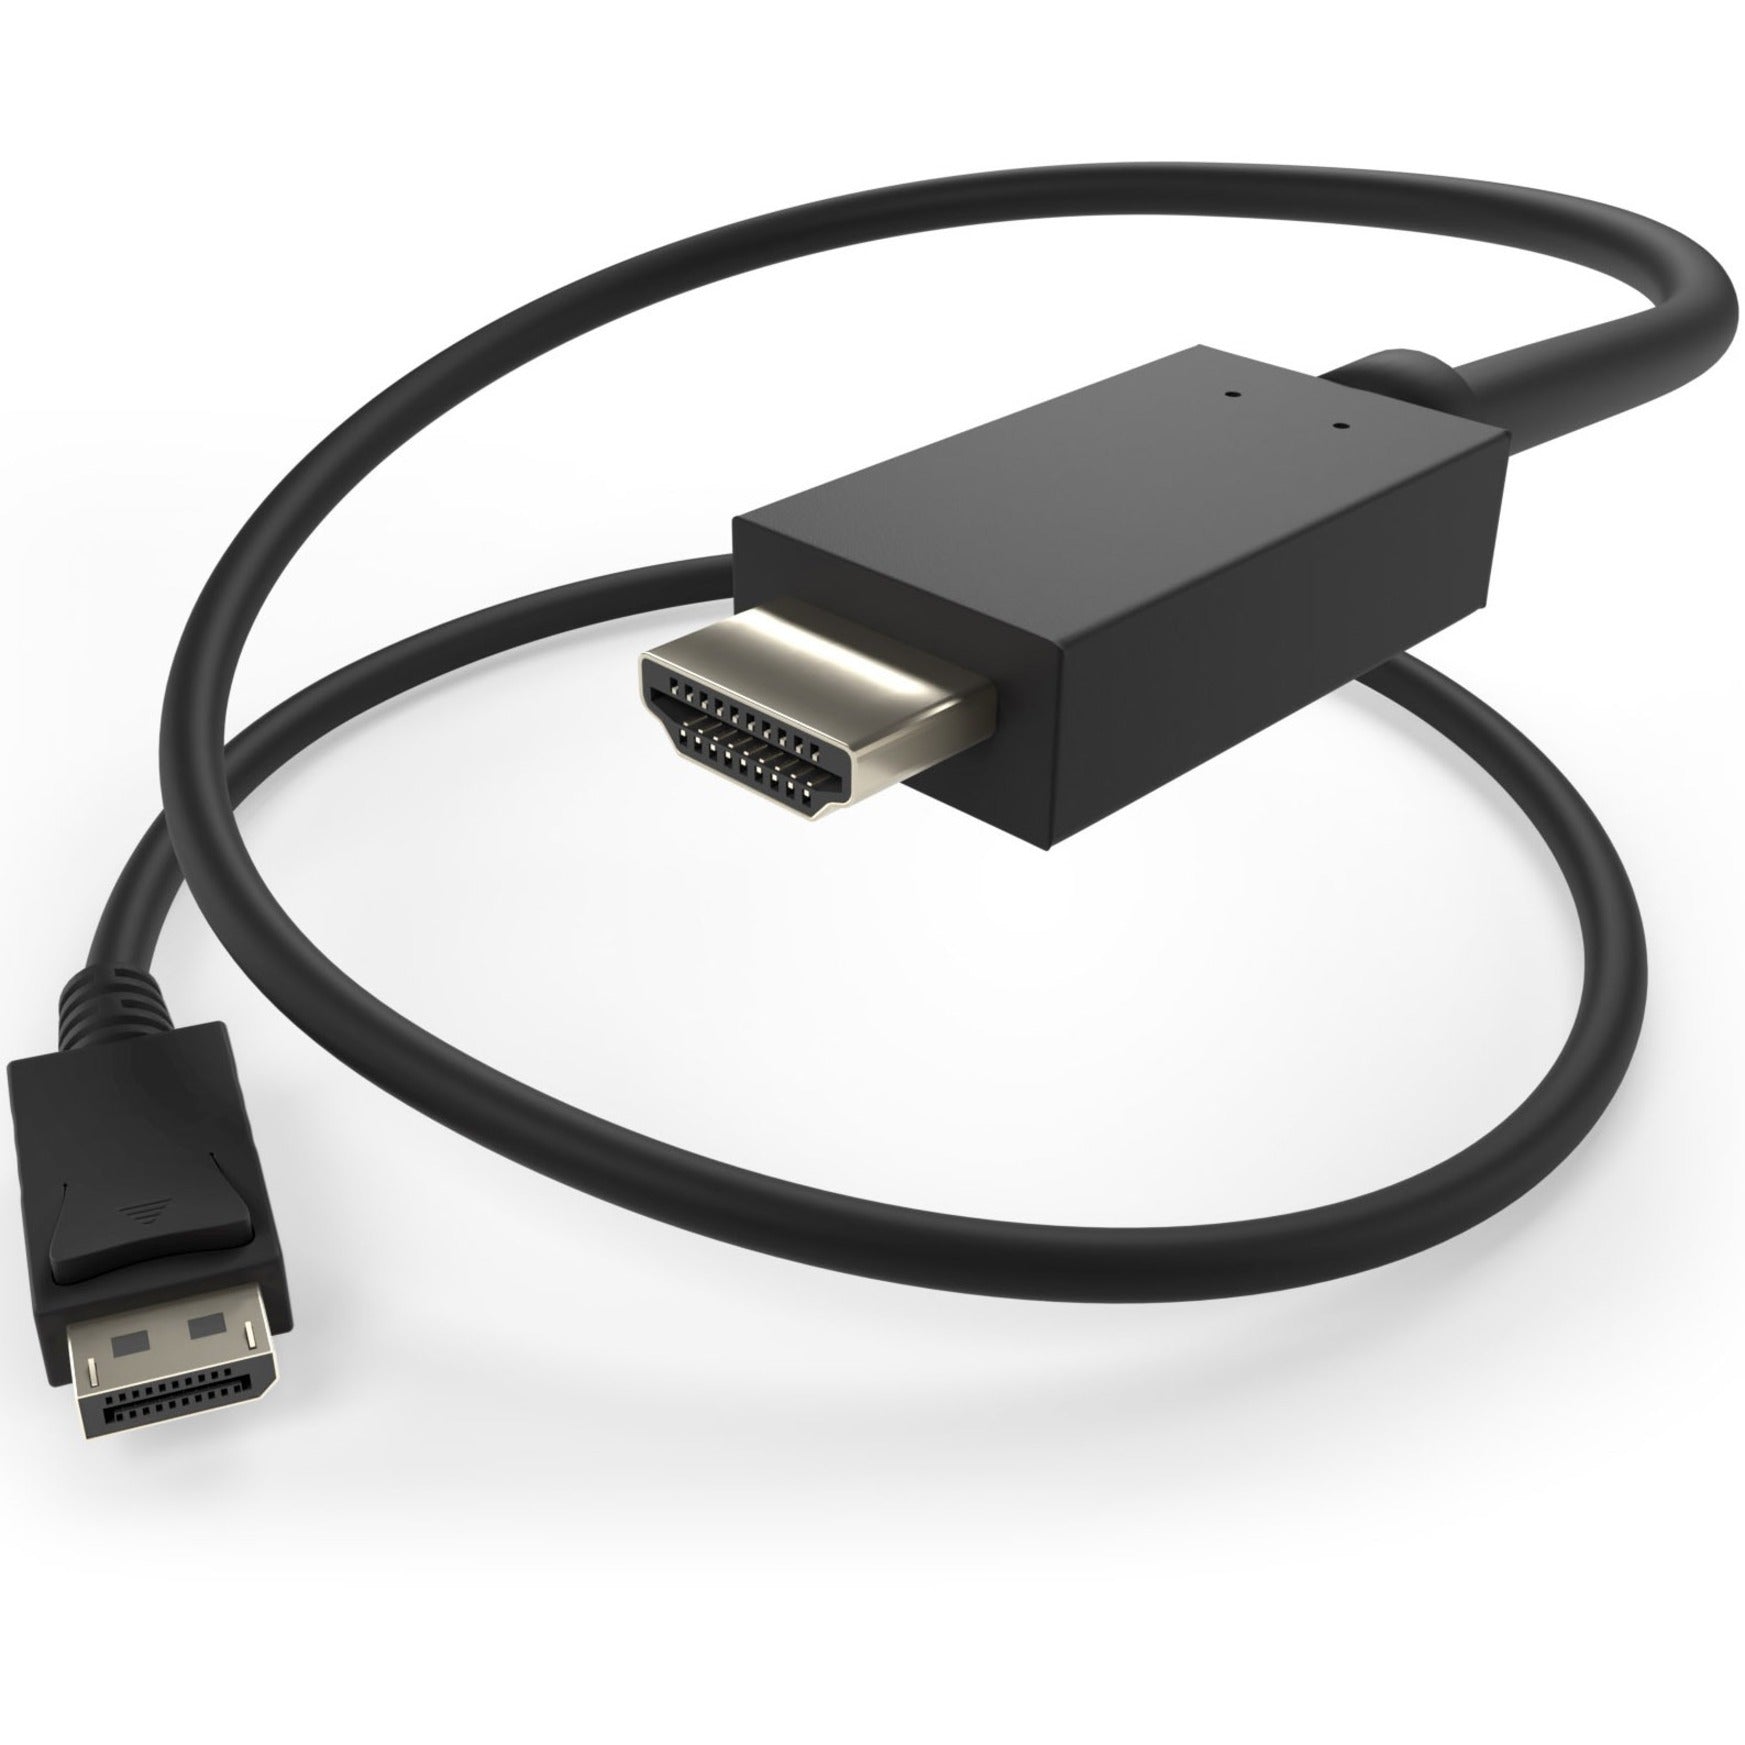 Unirise HDMIDP-10F-MM 10ft Displayport Male to HDMI Male Cable, High Quality Audio/Video Connection